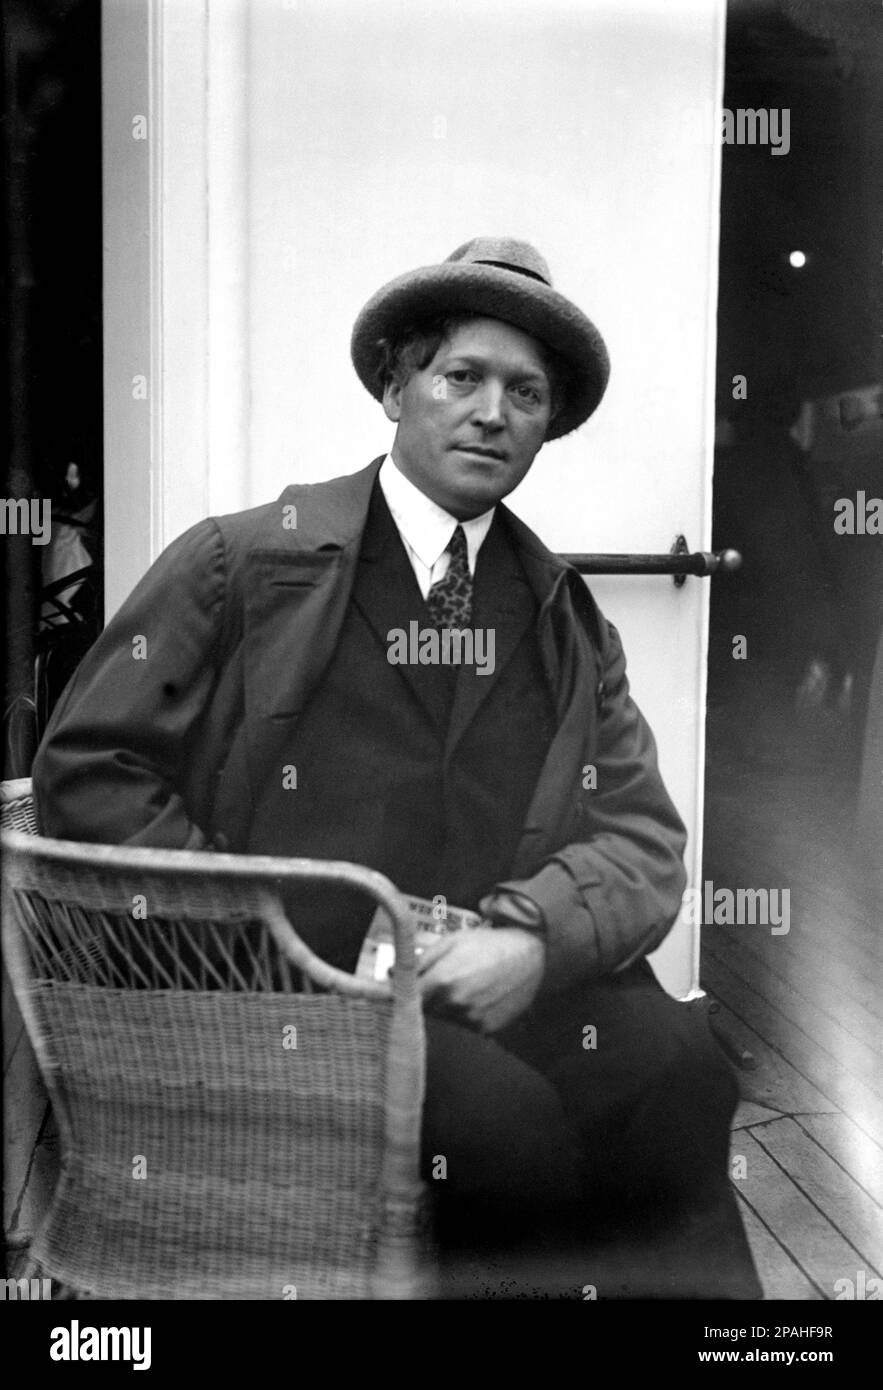 1920 's , New York , USA : The most celebrated german  silent  movie actor WERNER KRAUSS ( 1884 - 1959 ) return in Europe on Cruiser Ocean Liner .  Krauss was born in Gestungshausen, Germany, the son of a clergyman. He ran away from home and joined a travelling theatre company. There, he met the noted theatre director Max Reinhardt. Reinhardt took Krauss to Berlin where he became a film actor in 1916 . Krauss became a worldwide sensation for his demonic portrayal of the titular character in Robert Wiene's The Cabinet of Dr. Caligari ( Das Cabinet des Dr. Caligari - Il gabinetto del Dottor Cali Stock Photo